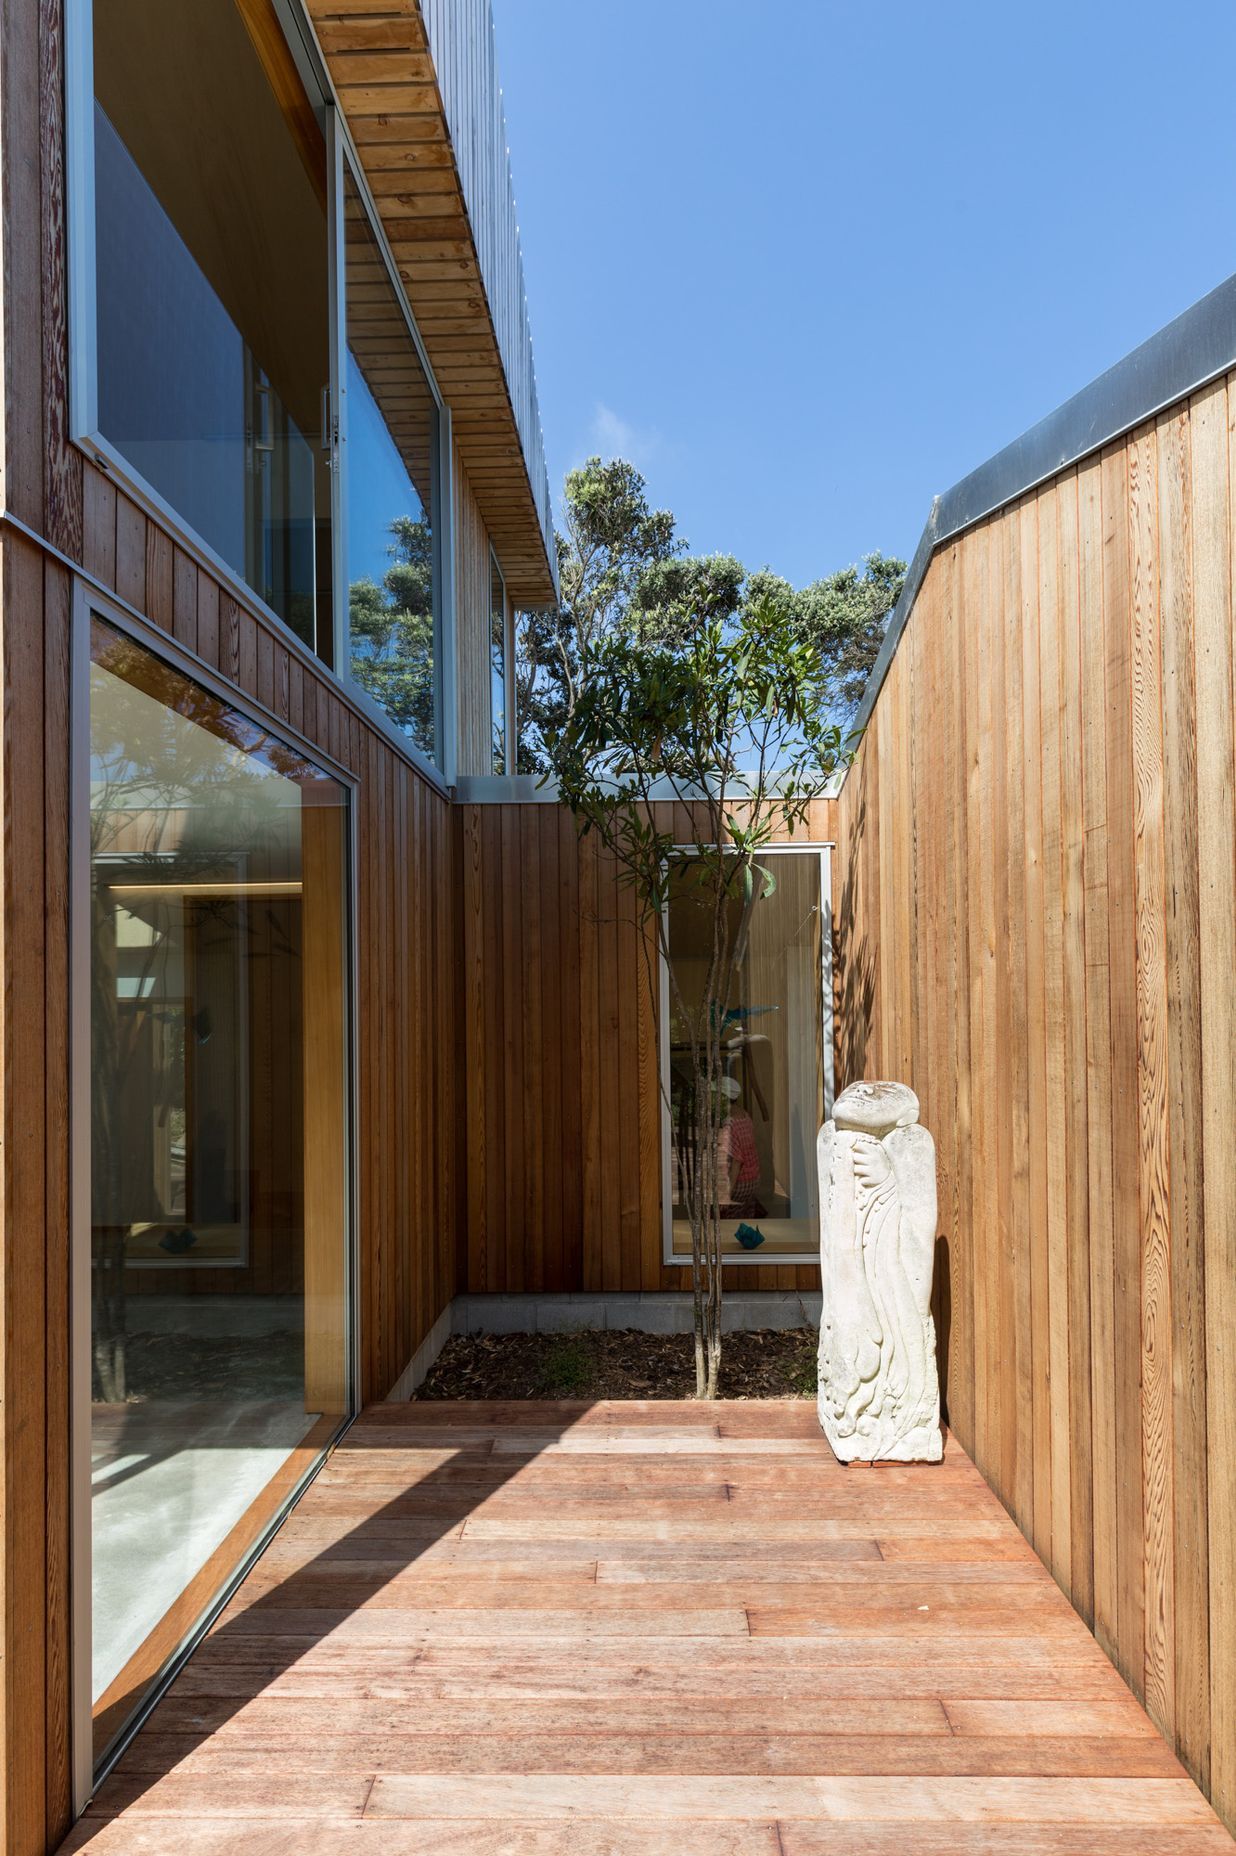 A small courtyard off the living area takes advantage of solar gain and natural ventilation.